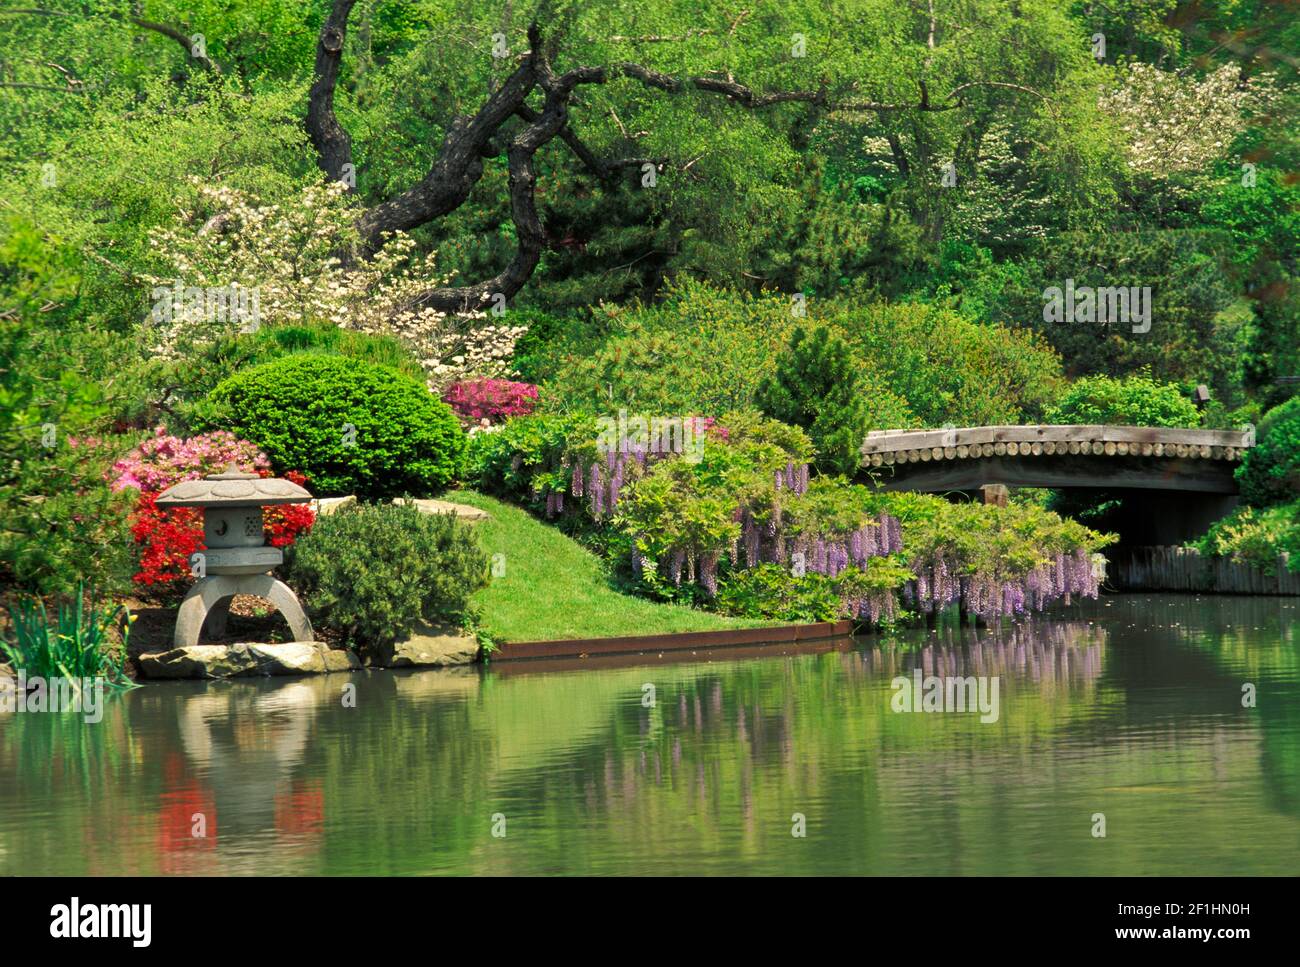 Lush blooms of spring wysteria, azaleas, dogwood and pear are vivid against the the green leaves and reflected in the water near the bridge Stock Photo